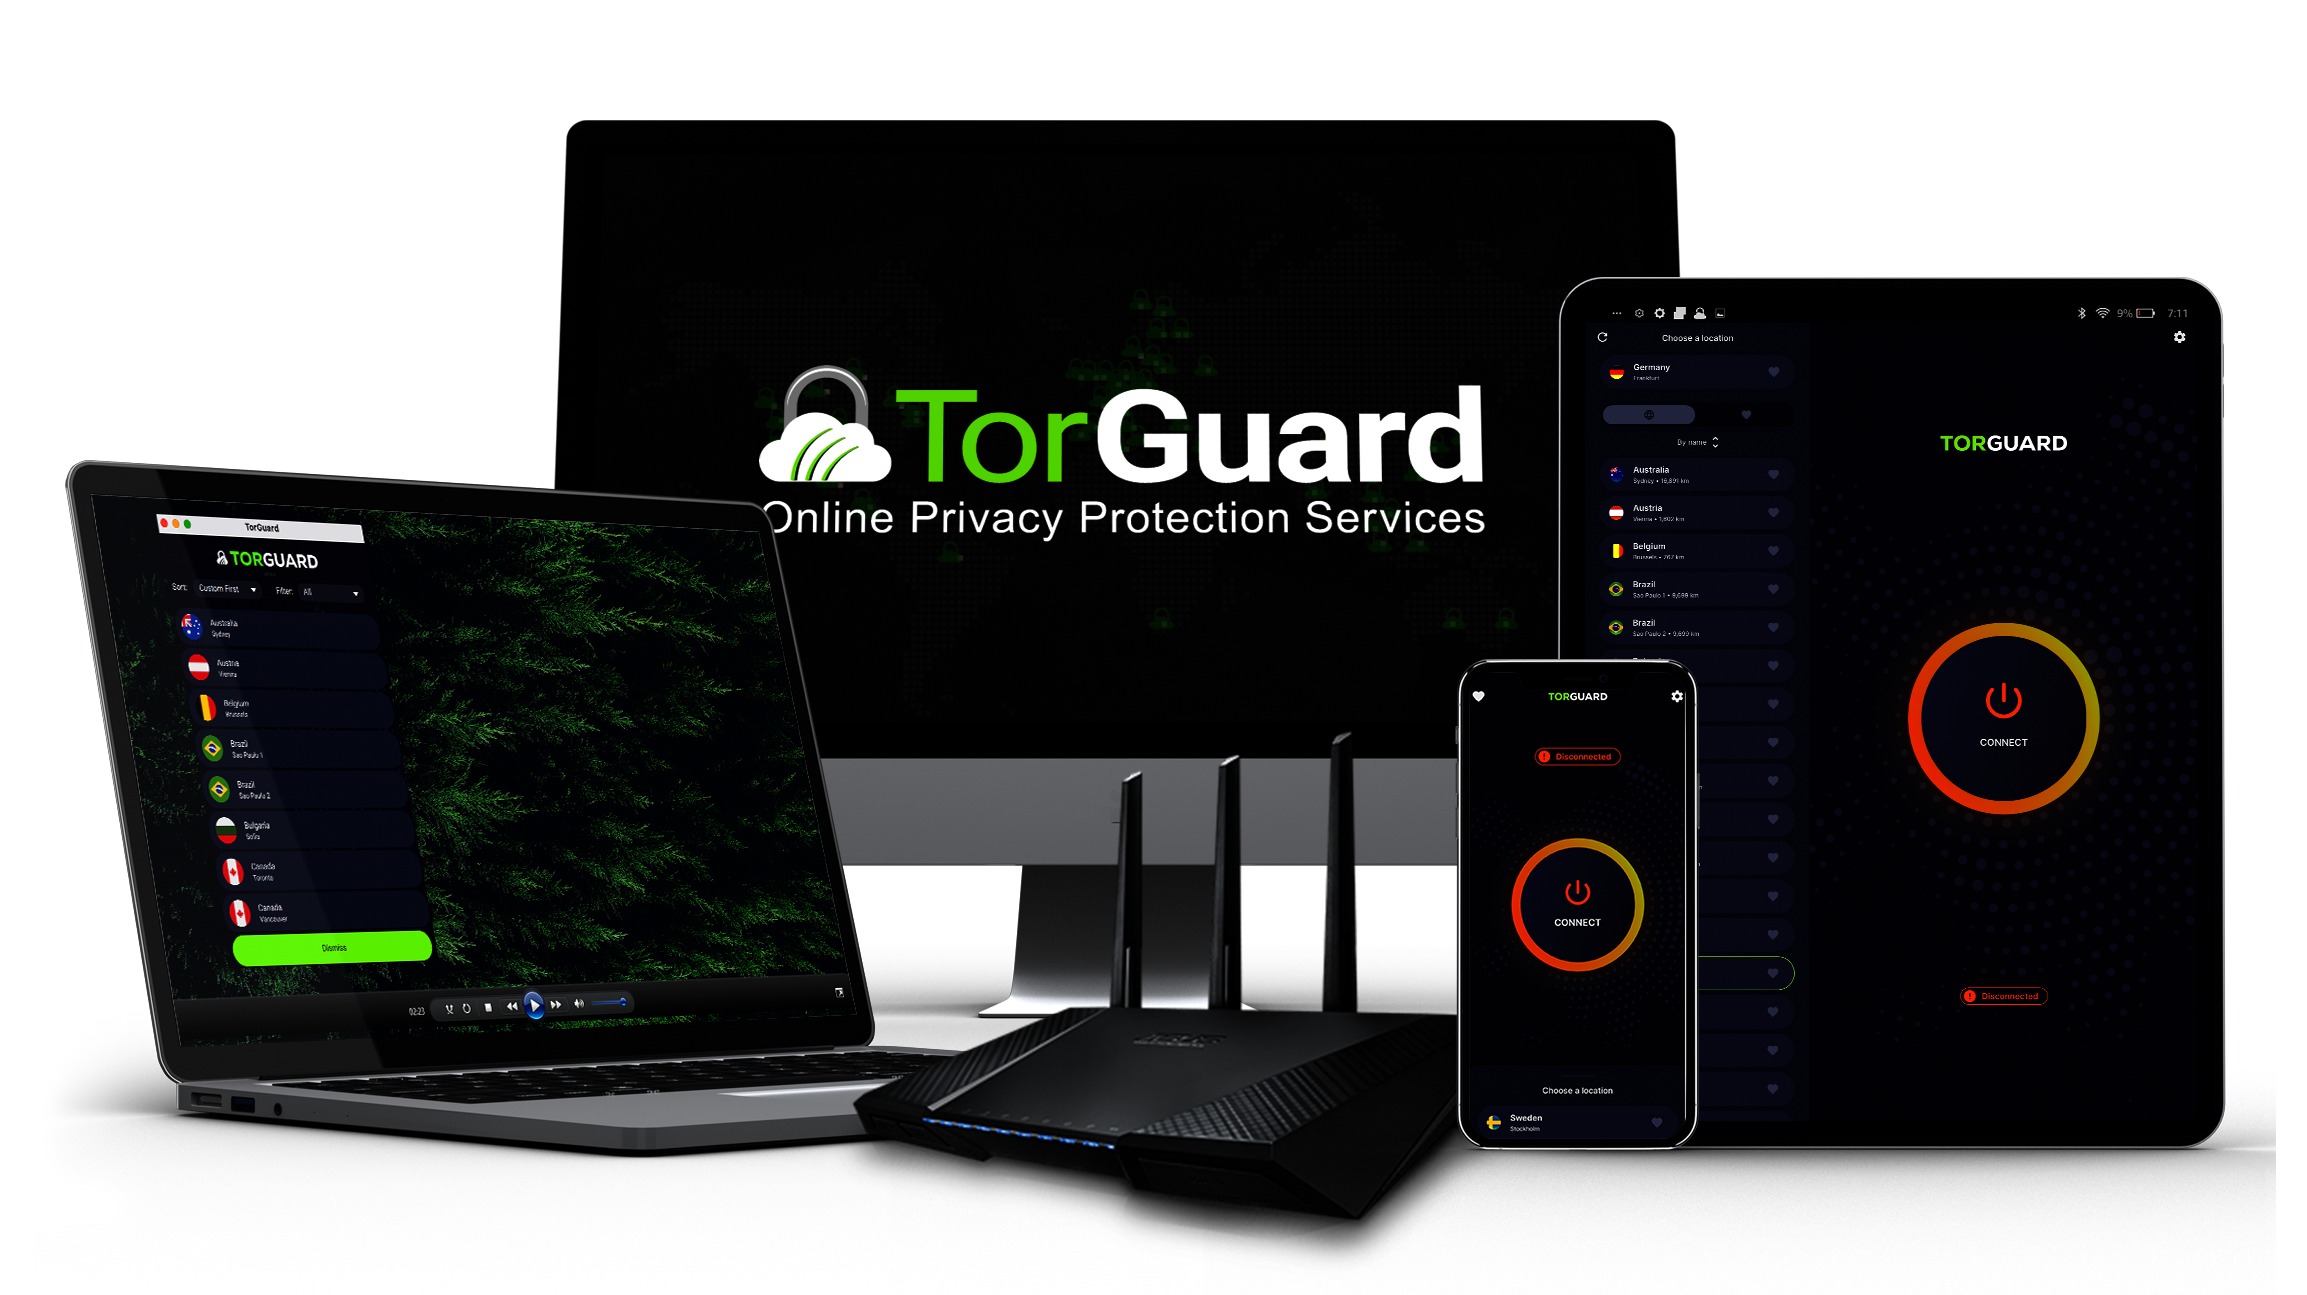 mguard vpn stealth see other devices